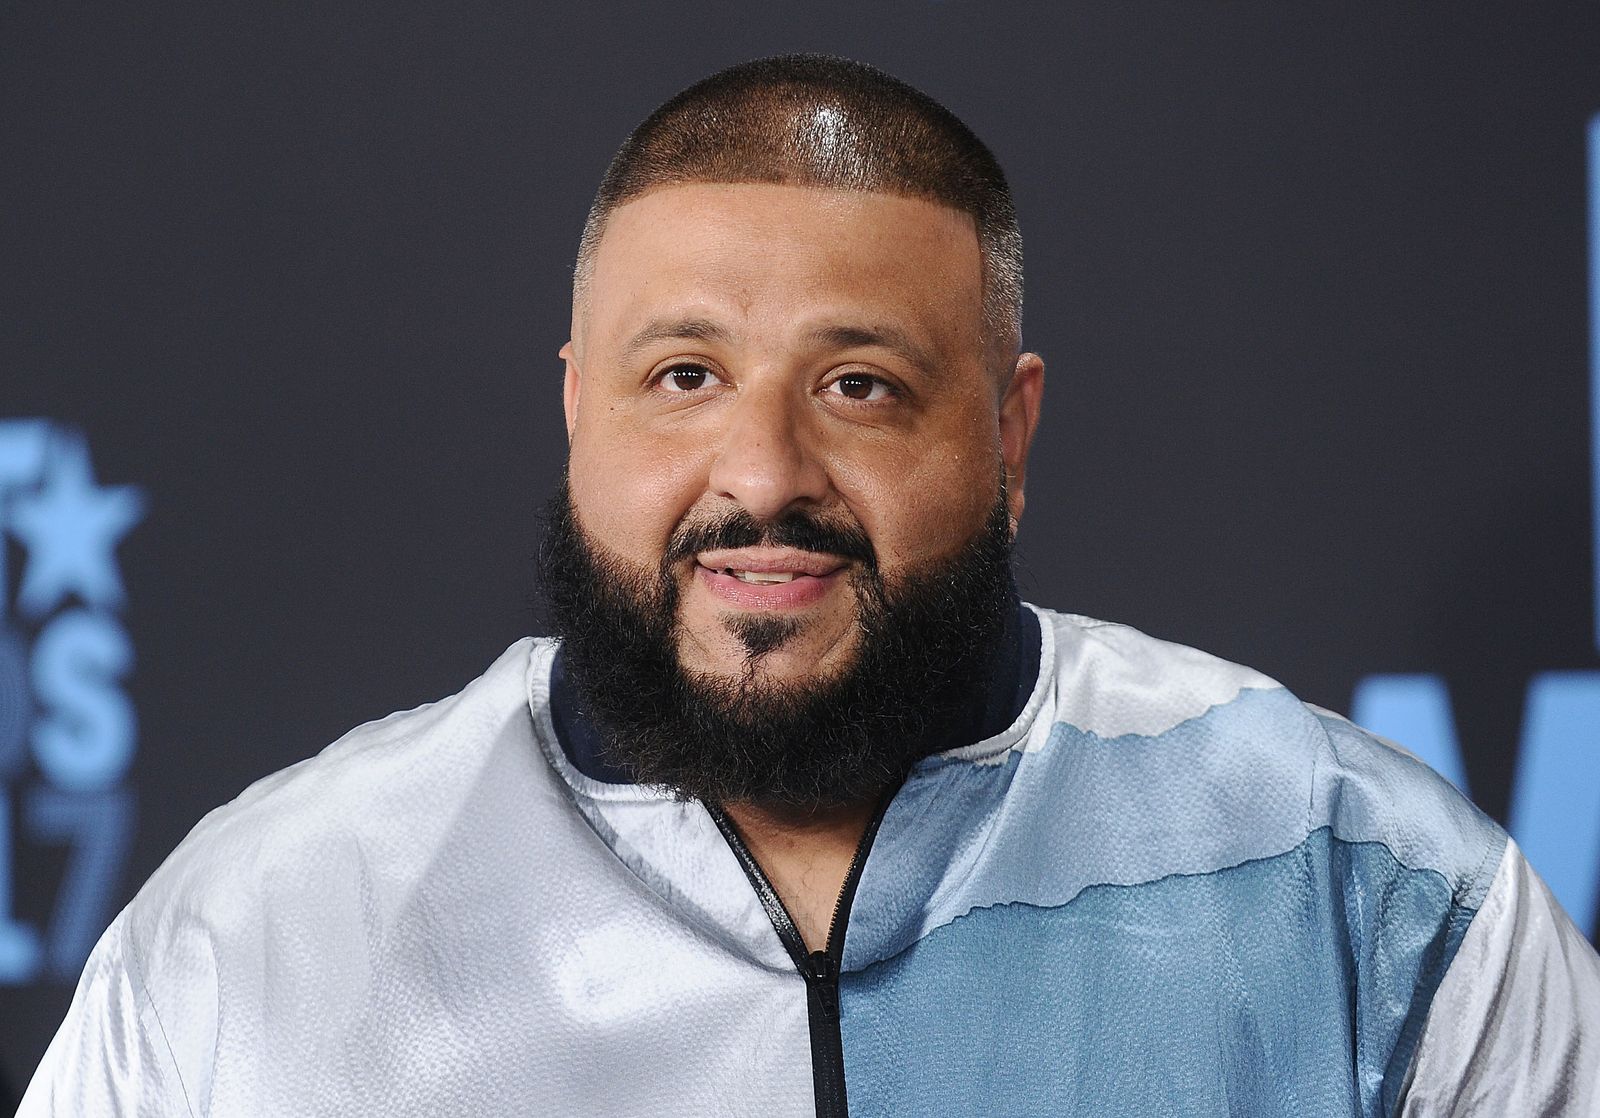 DJ Khaled at the 2017 BET Awards at Microsoft Theater on June 25, 2017 | Photo: Getty Images